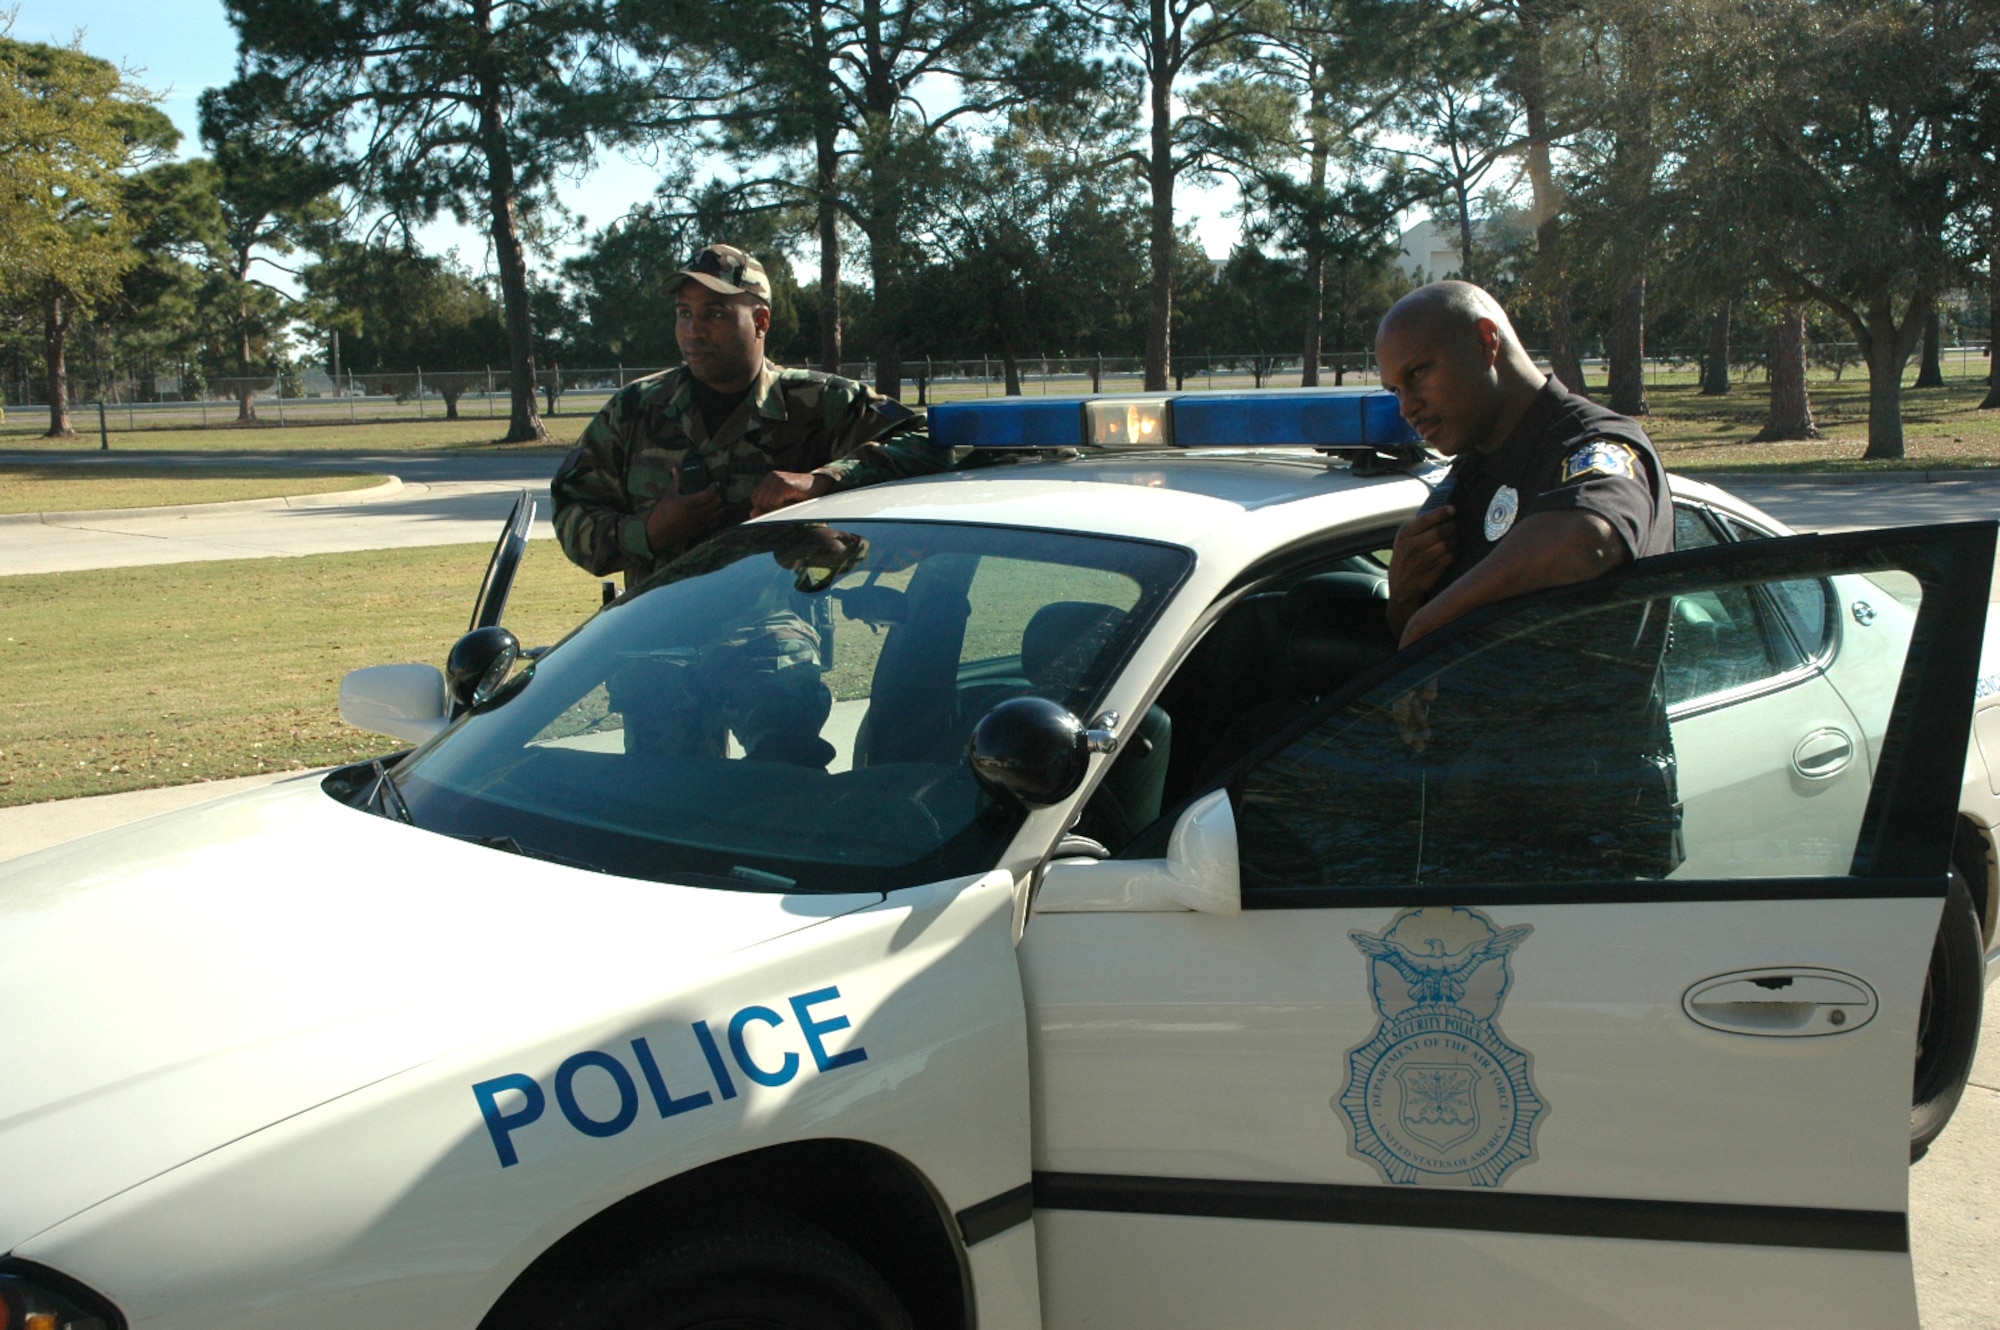 Staff Sgt. James A. Dandridge Jr. (left) and Patrolman Duane Coleman (right) patrol Tyndall Air Force Base as rotated partners. Sergeant Dandridge, a national guardsman, has been at Tyndall for two years and Patrolman Coleman has been working as an AF police officer here since February.
